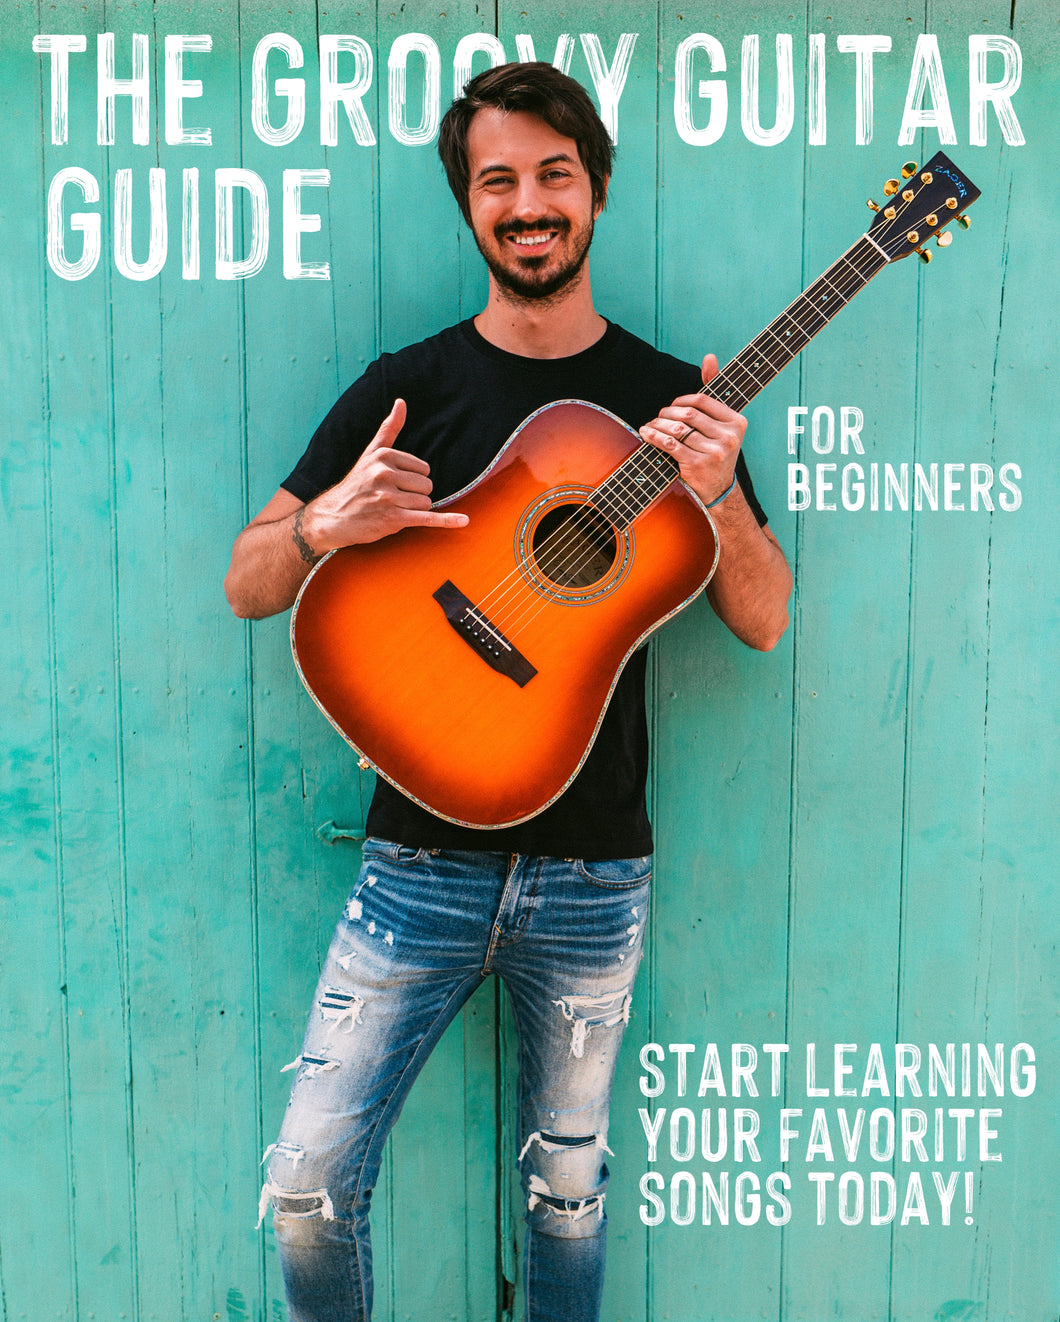 Guitar Course for Beginners - The Groovy Guitar Dude